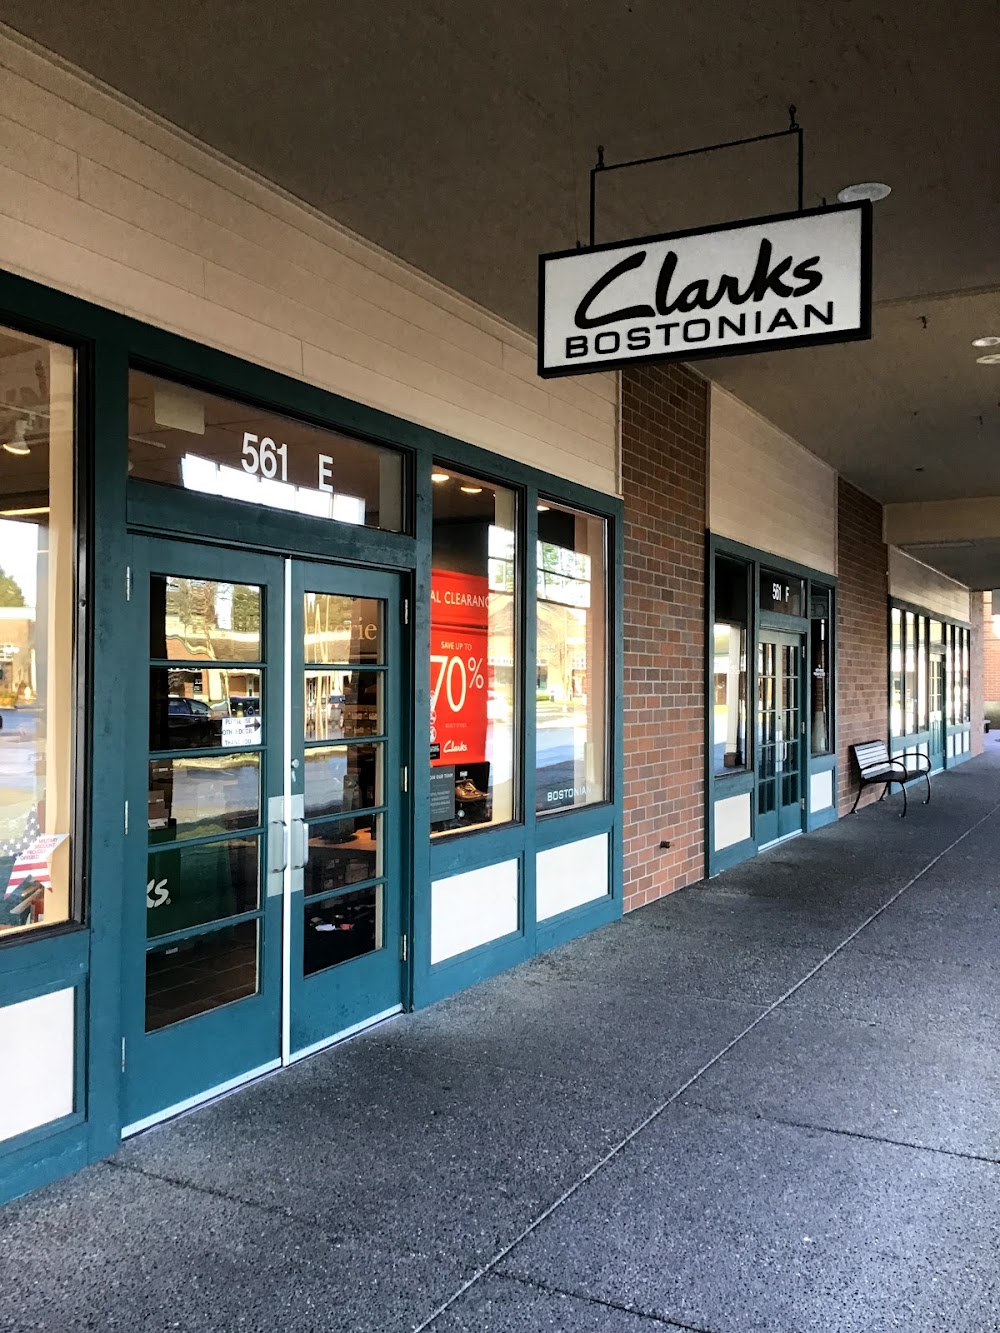 Clarks Bostonian Outlet in Snoqualmie